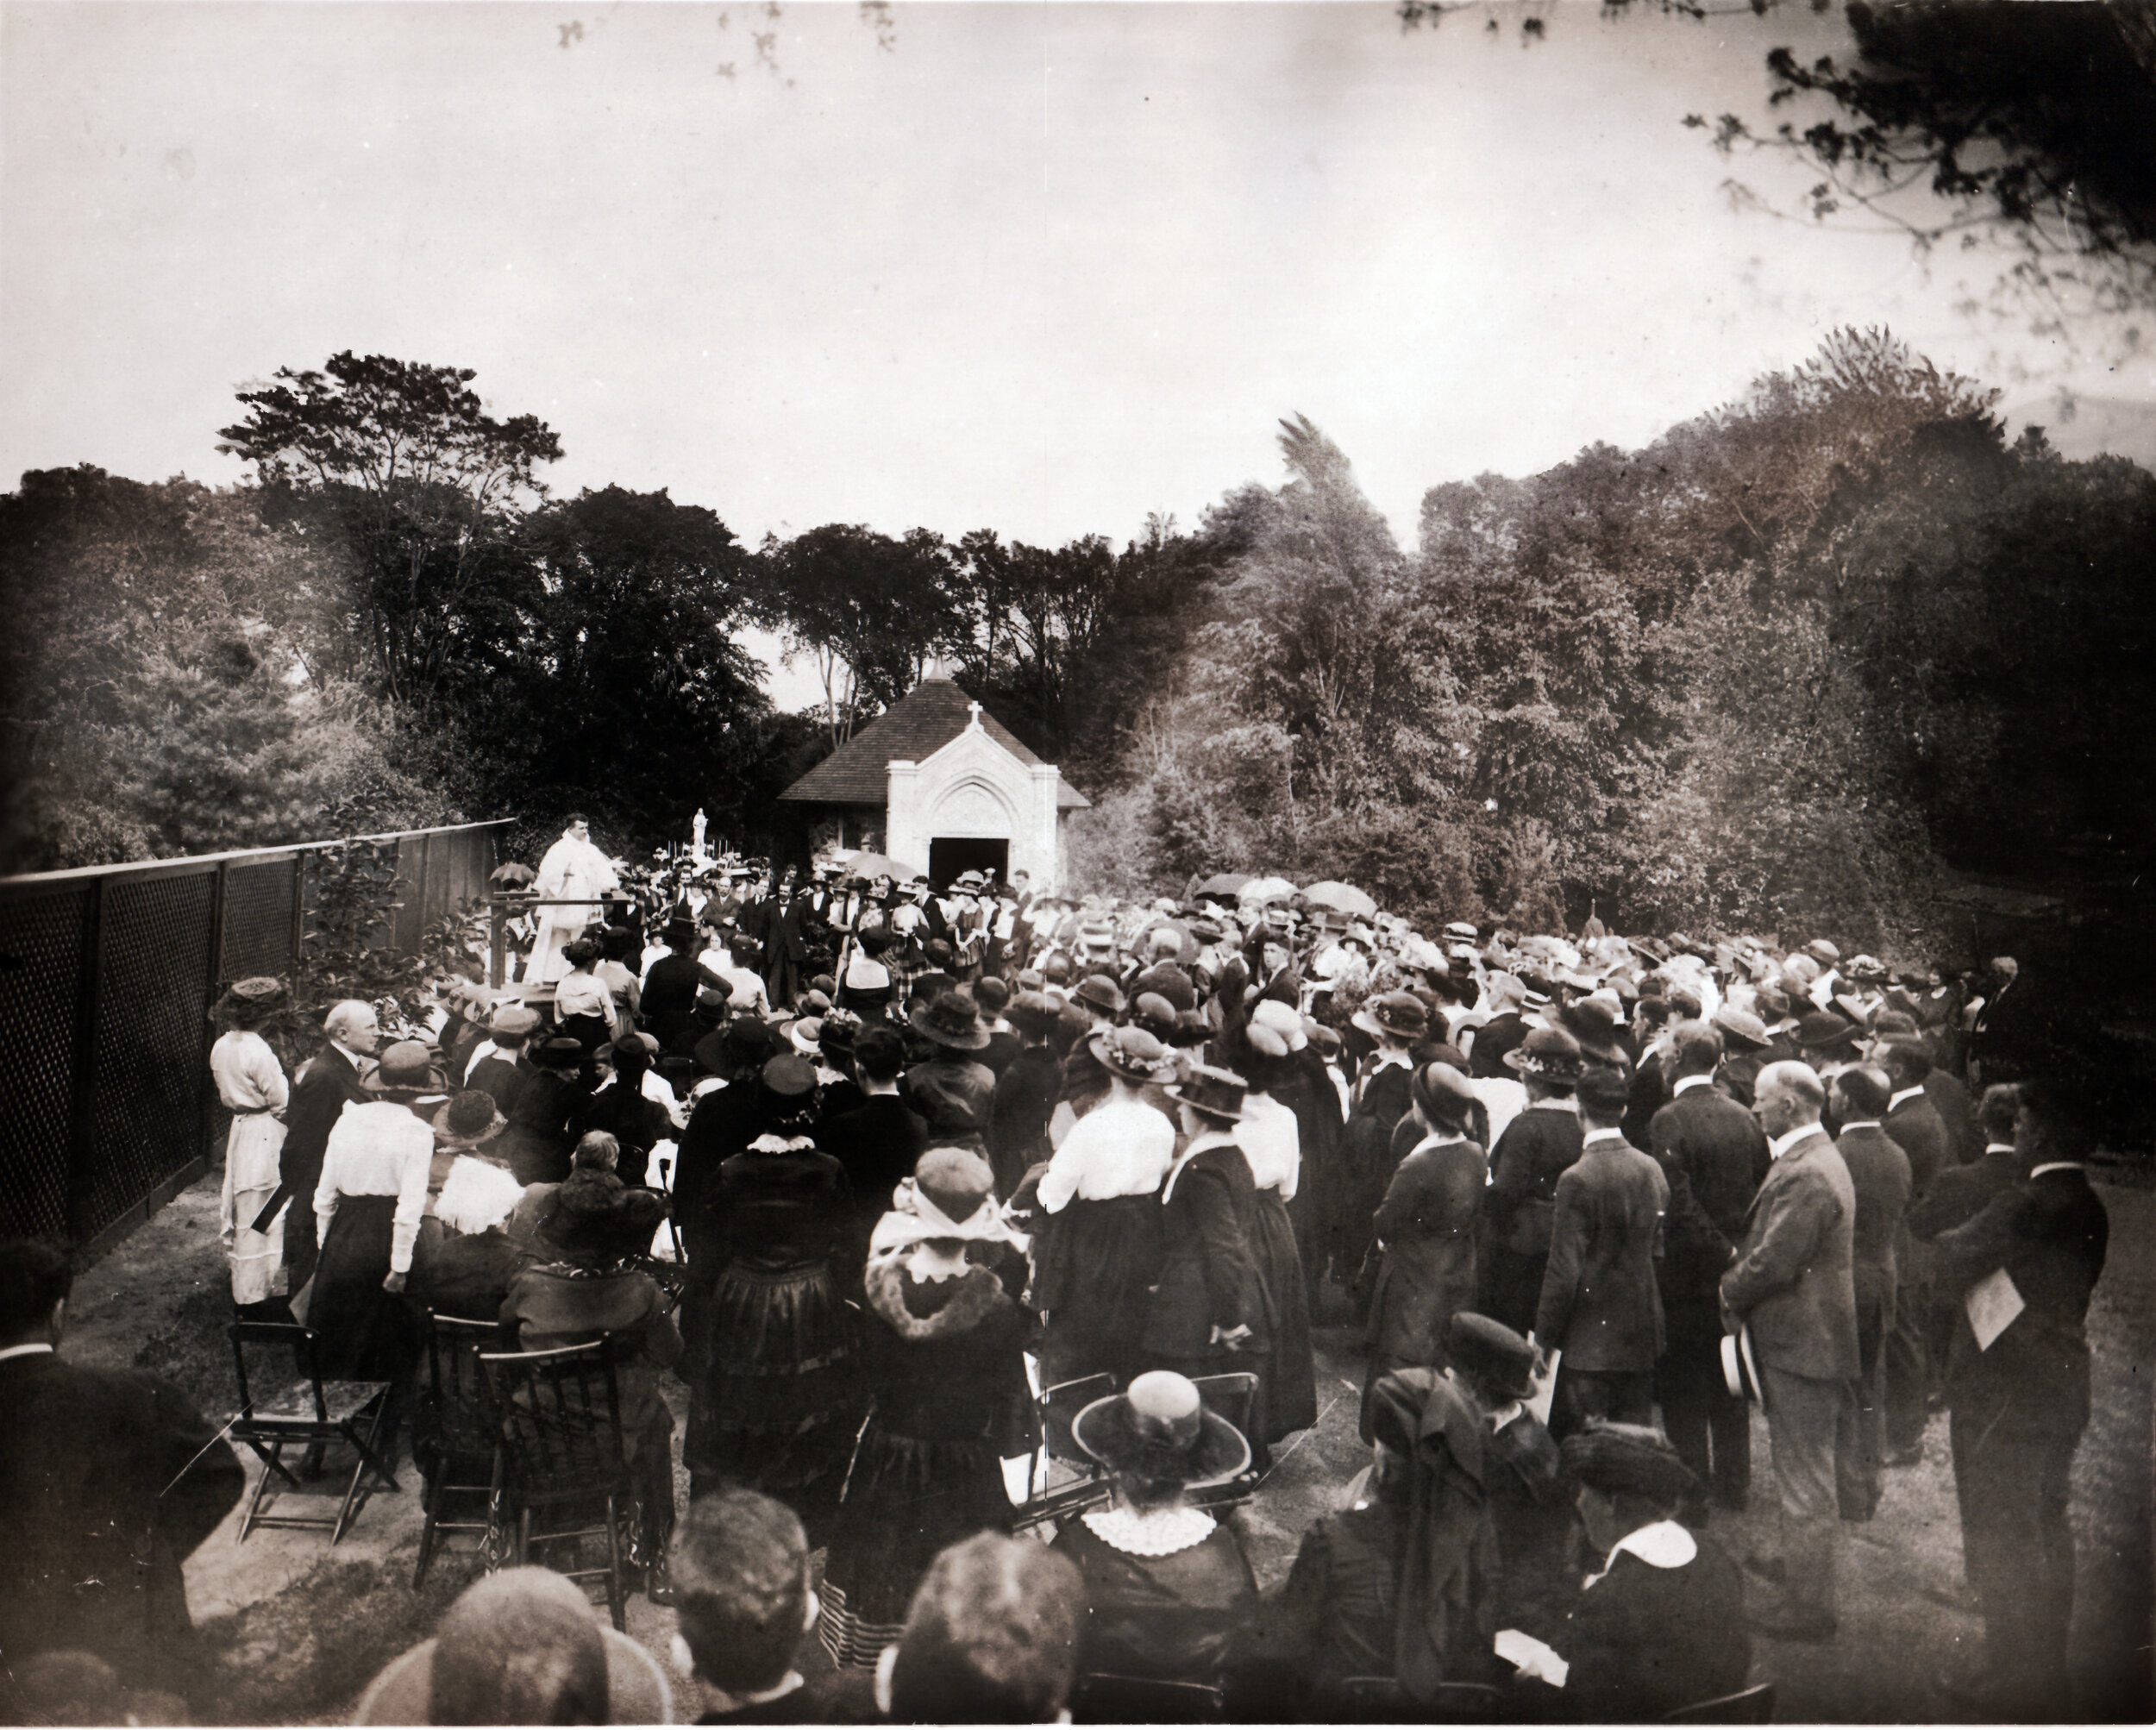  First Public Rosary Pilgrimage held May 22, 1921. The new grotto can be seen in the background. 